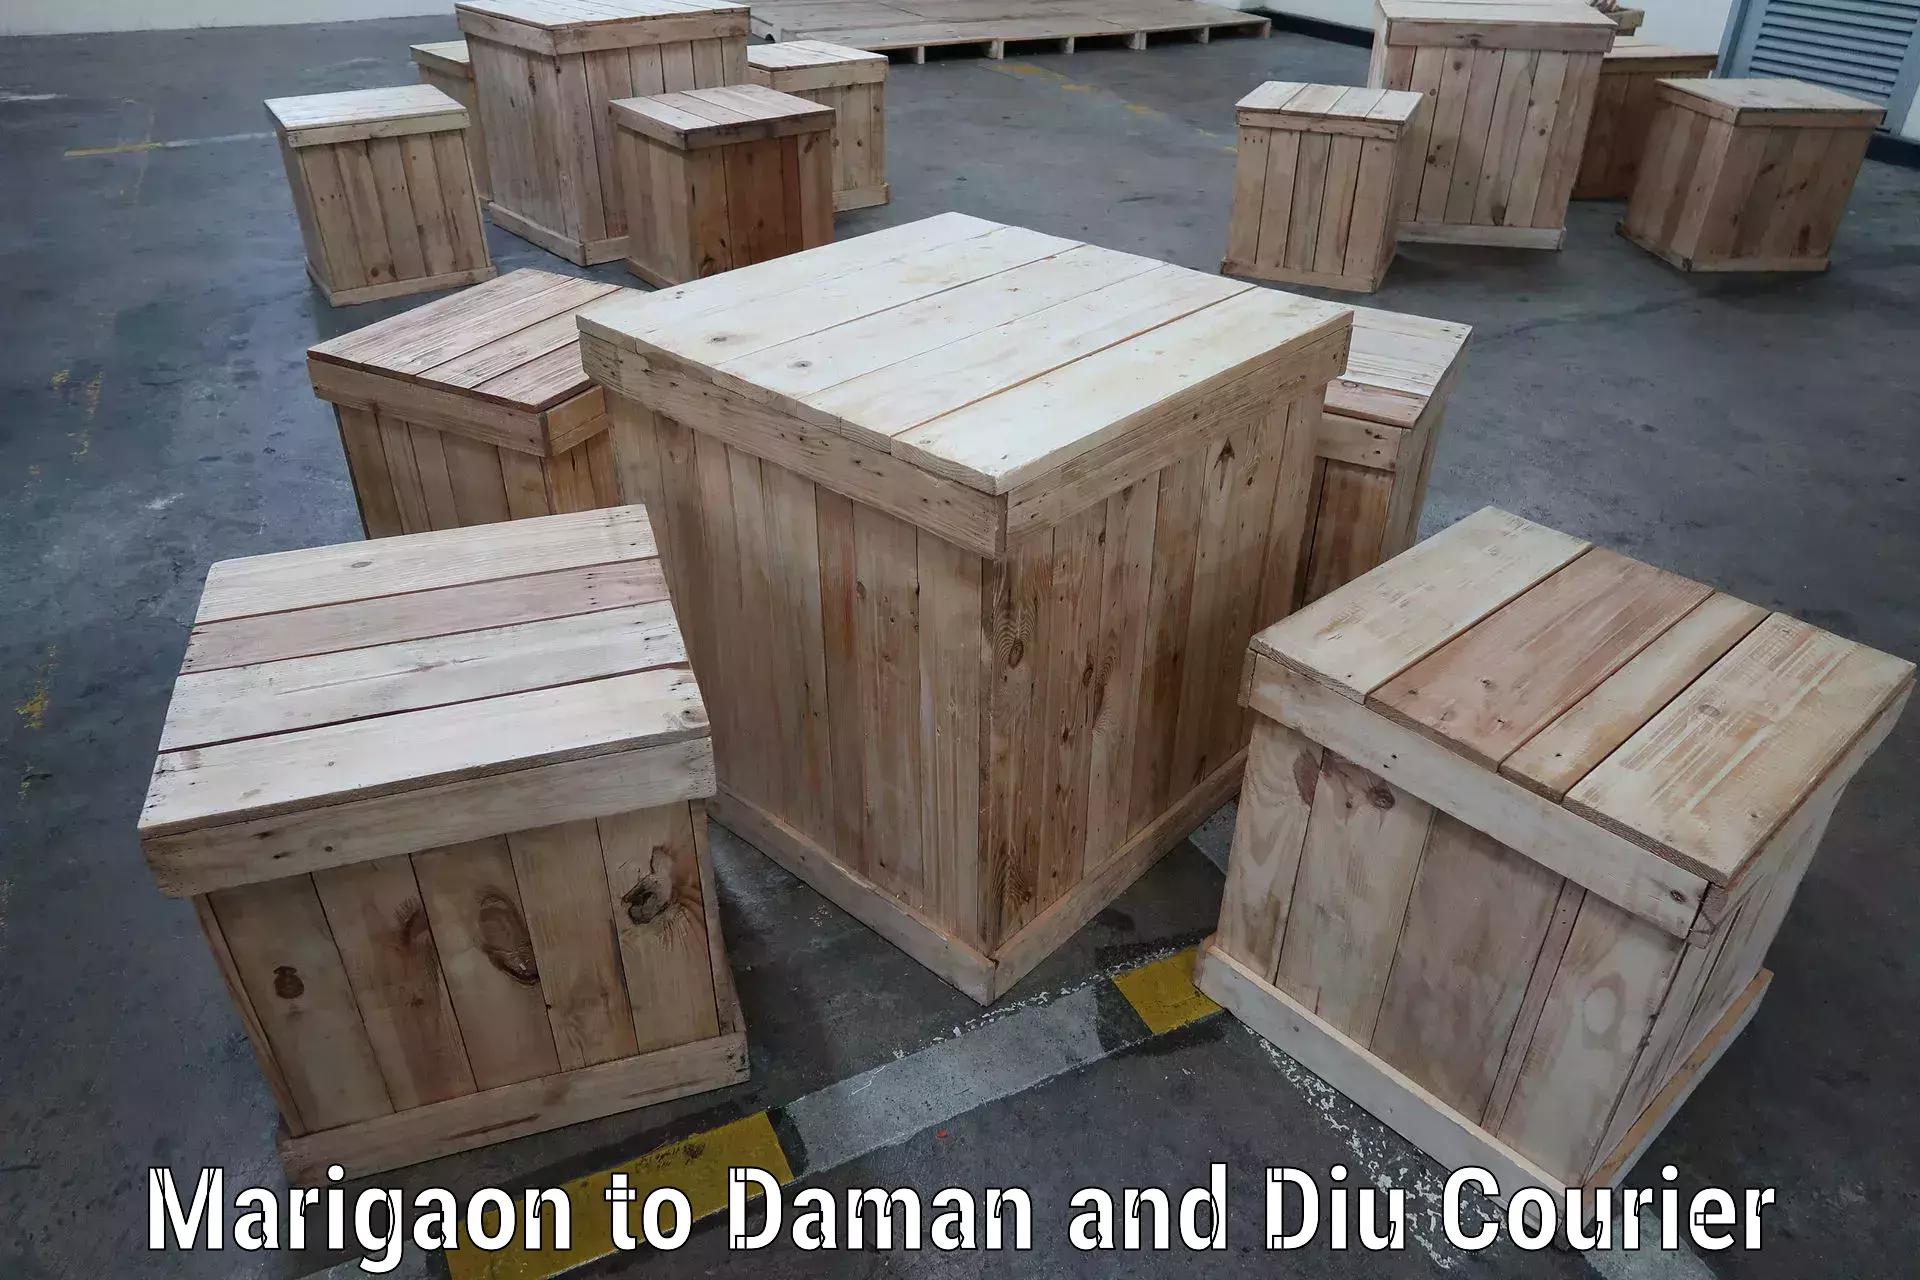 Specialized shipment handling Marigaon to Daman and Diu